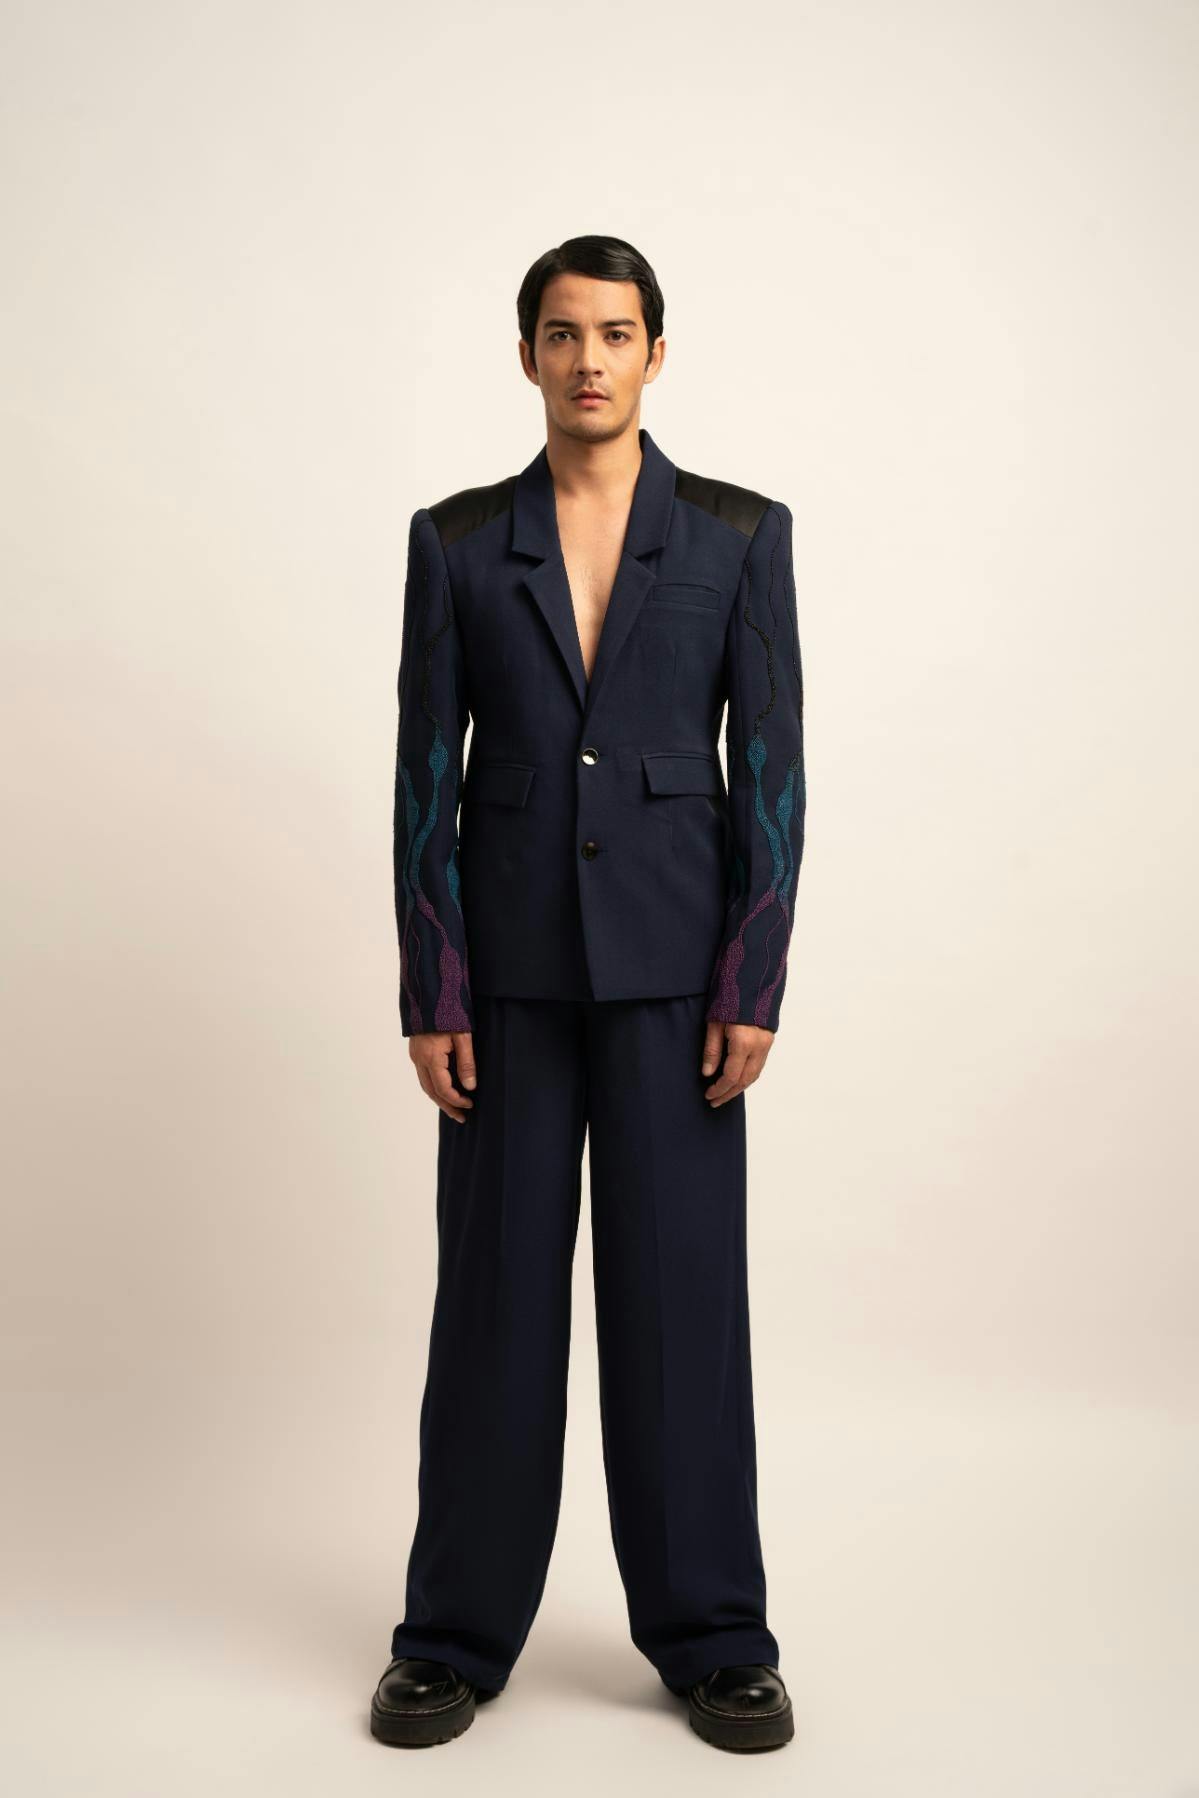 The Aetherial Blazer Set, a product by Siddhant Agrawal Label